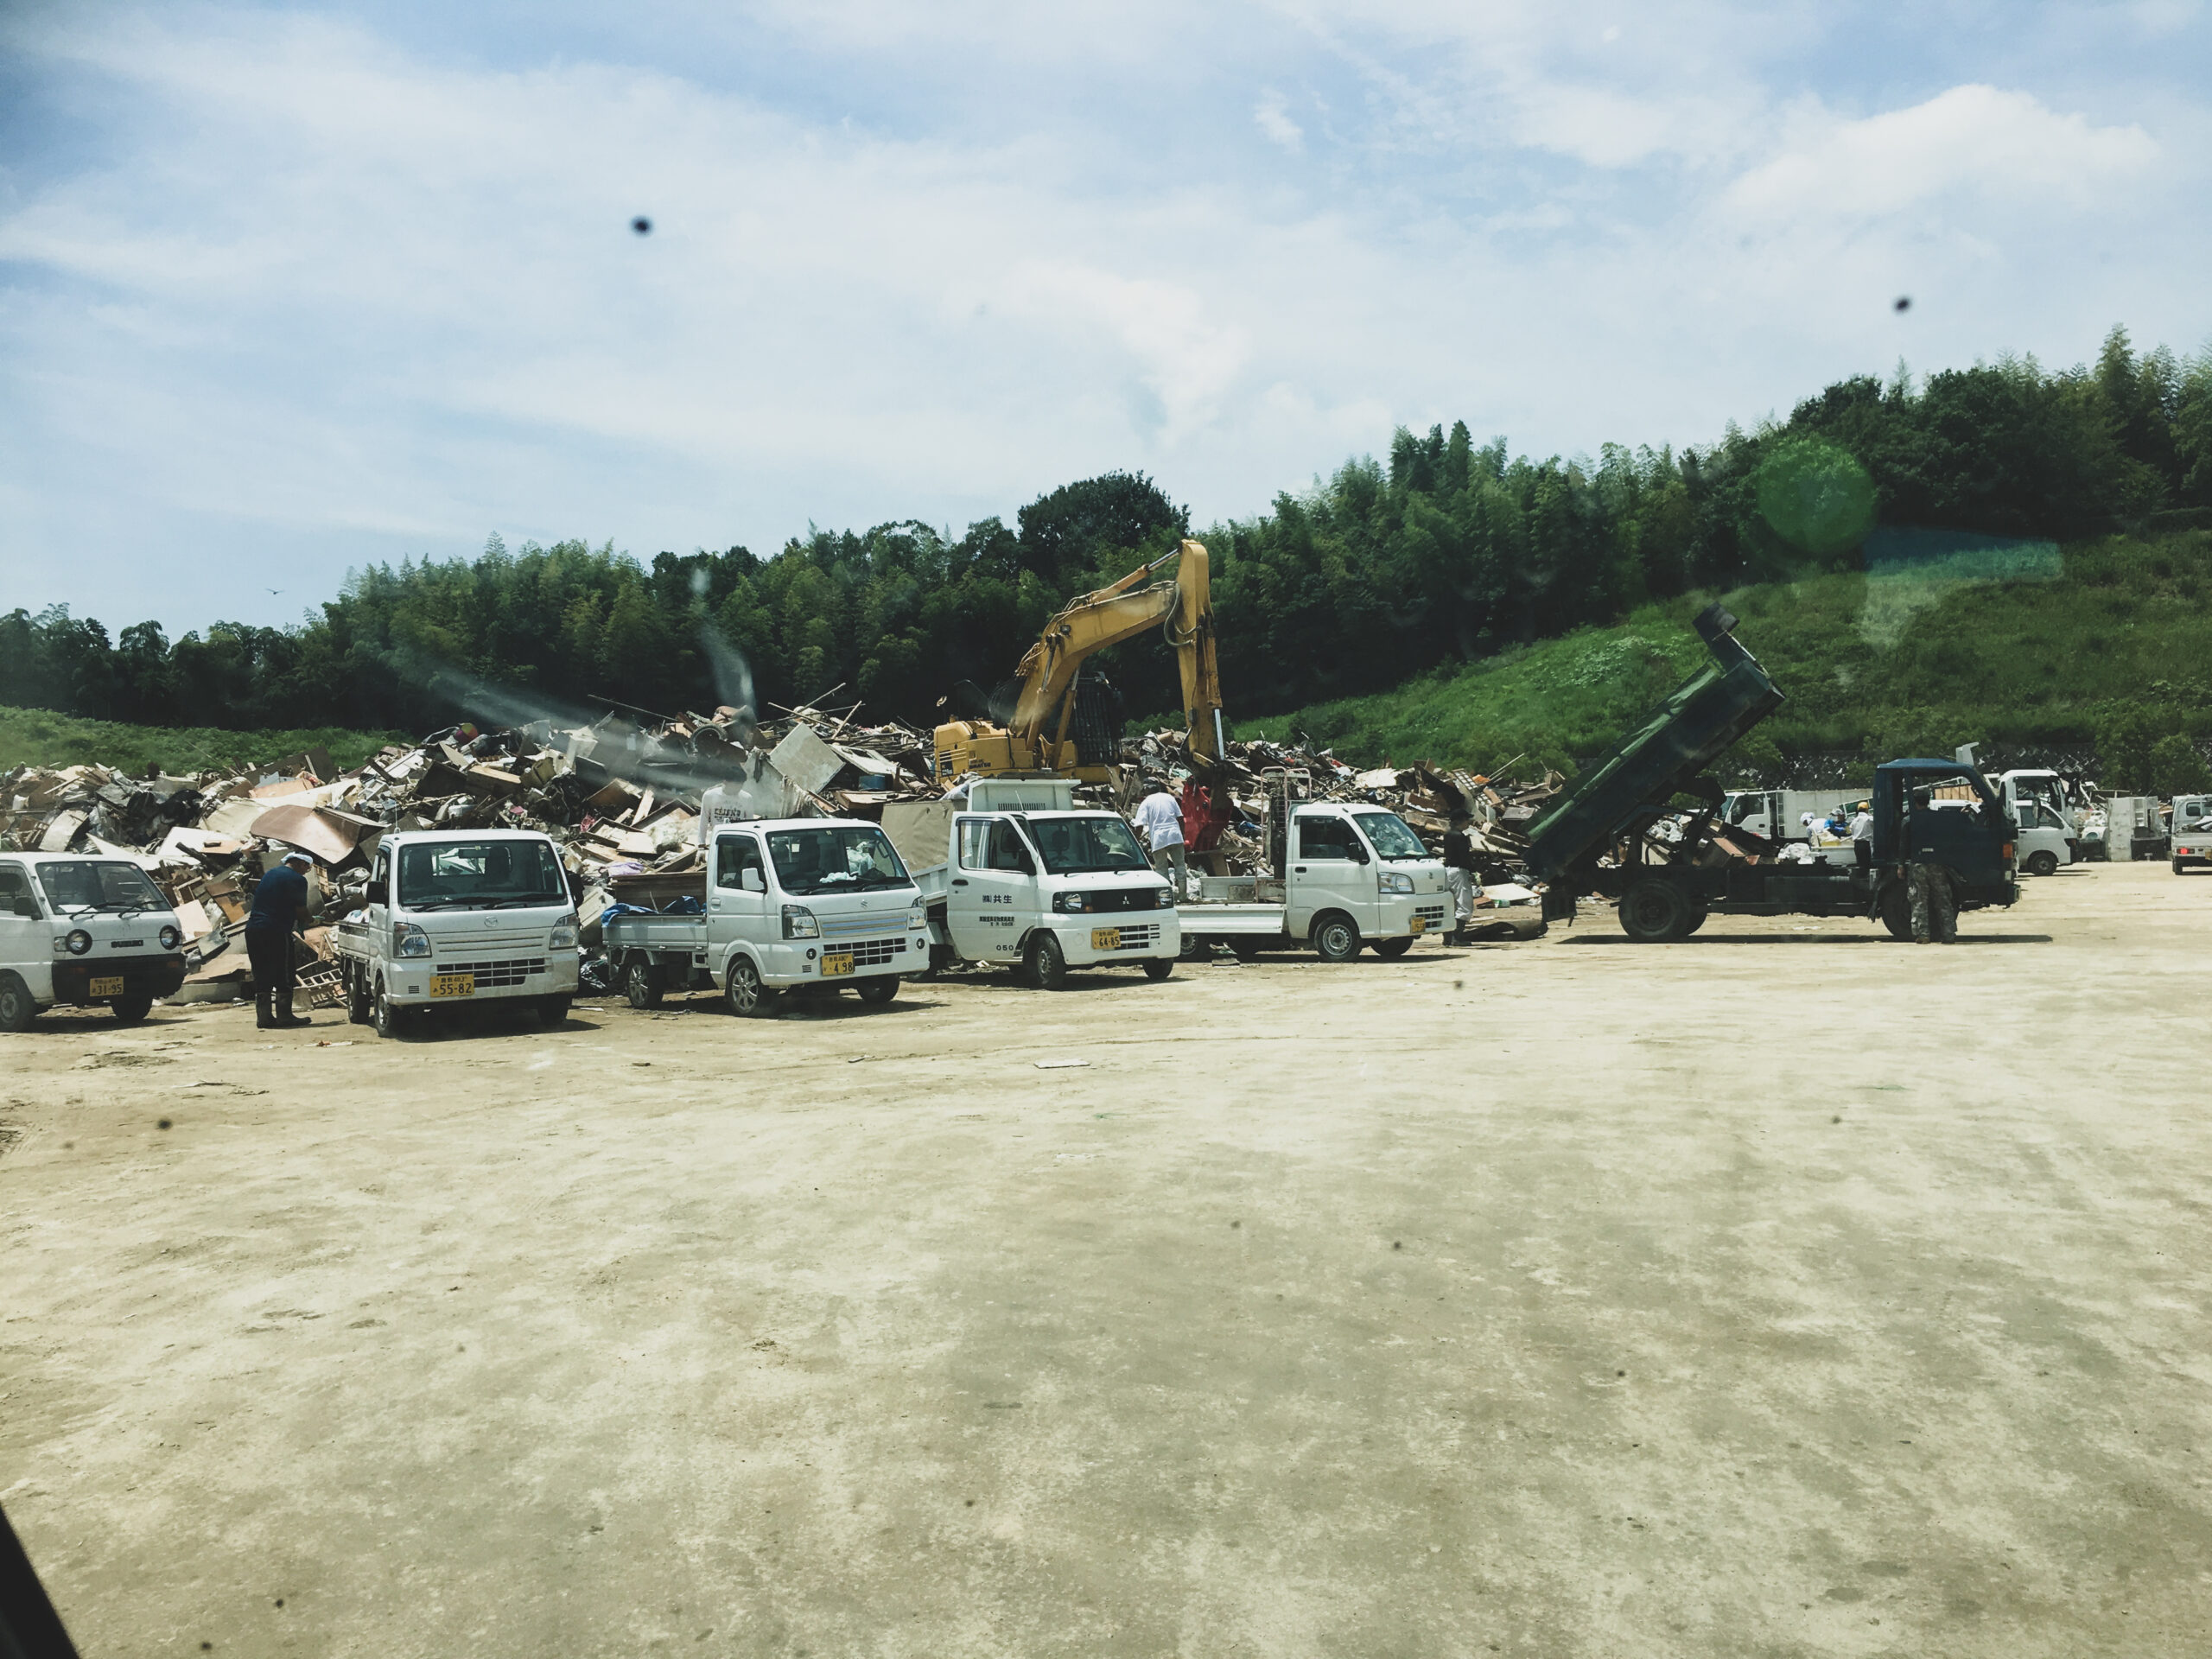 Mini Trucks Gathered at Mabi-cho's Waste Collection Site